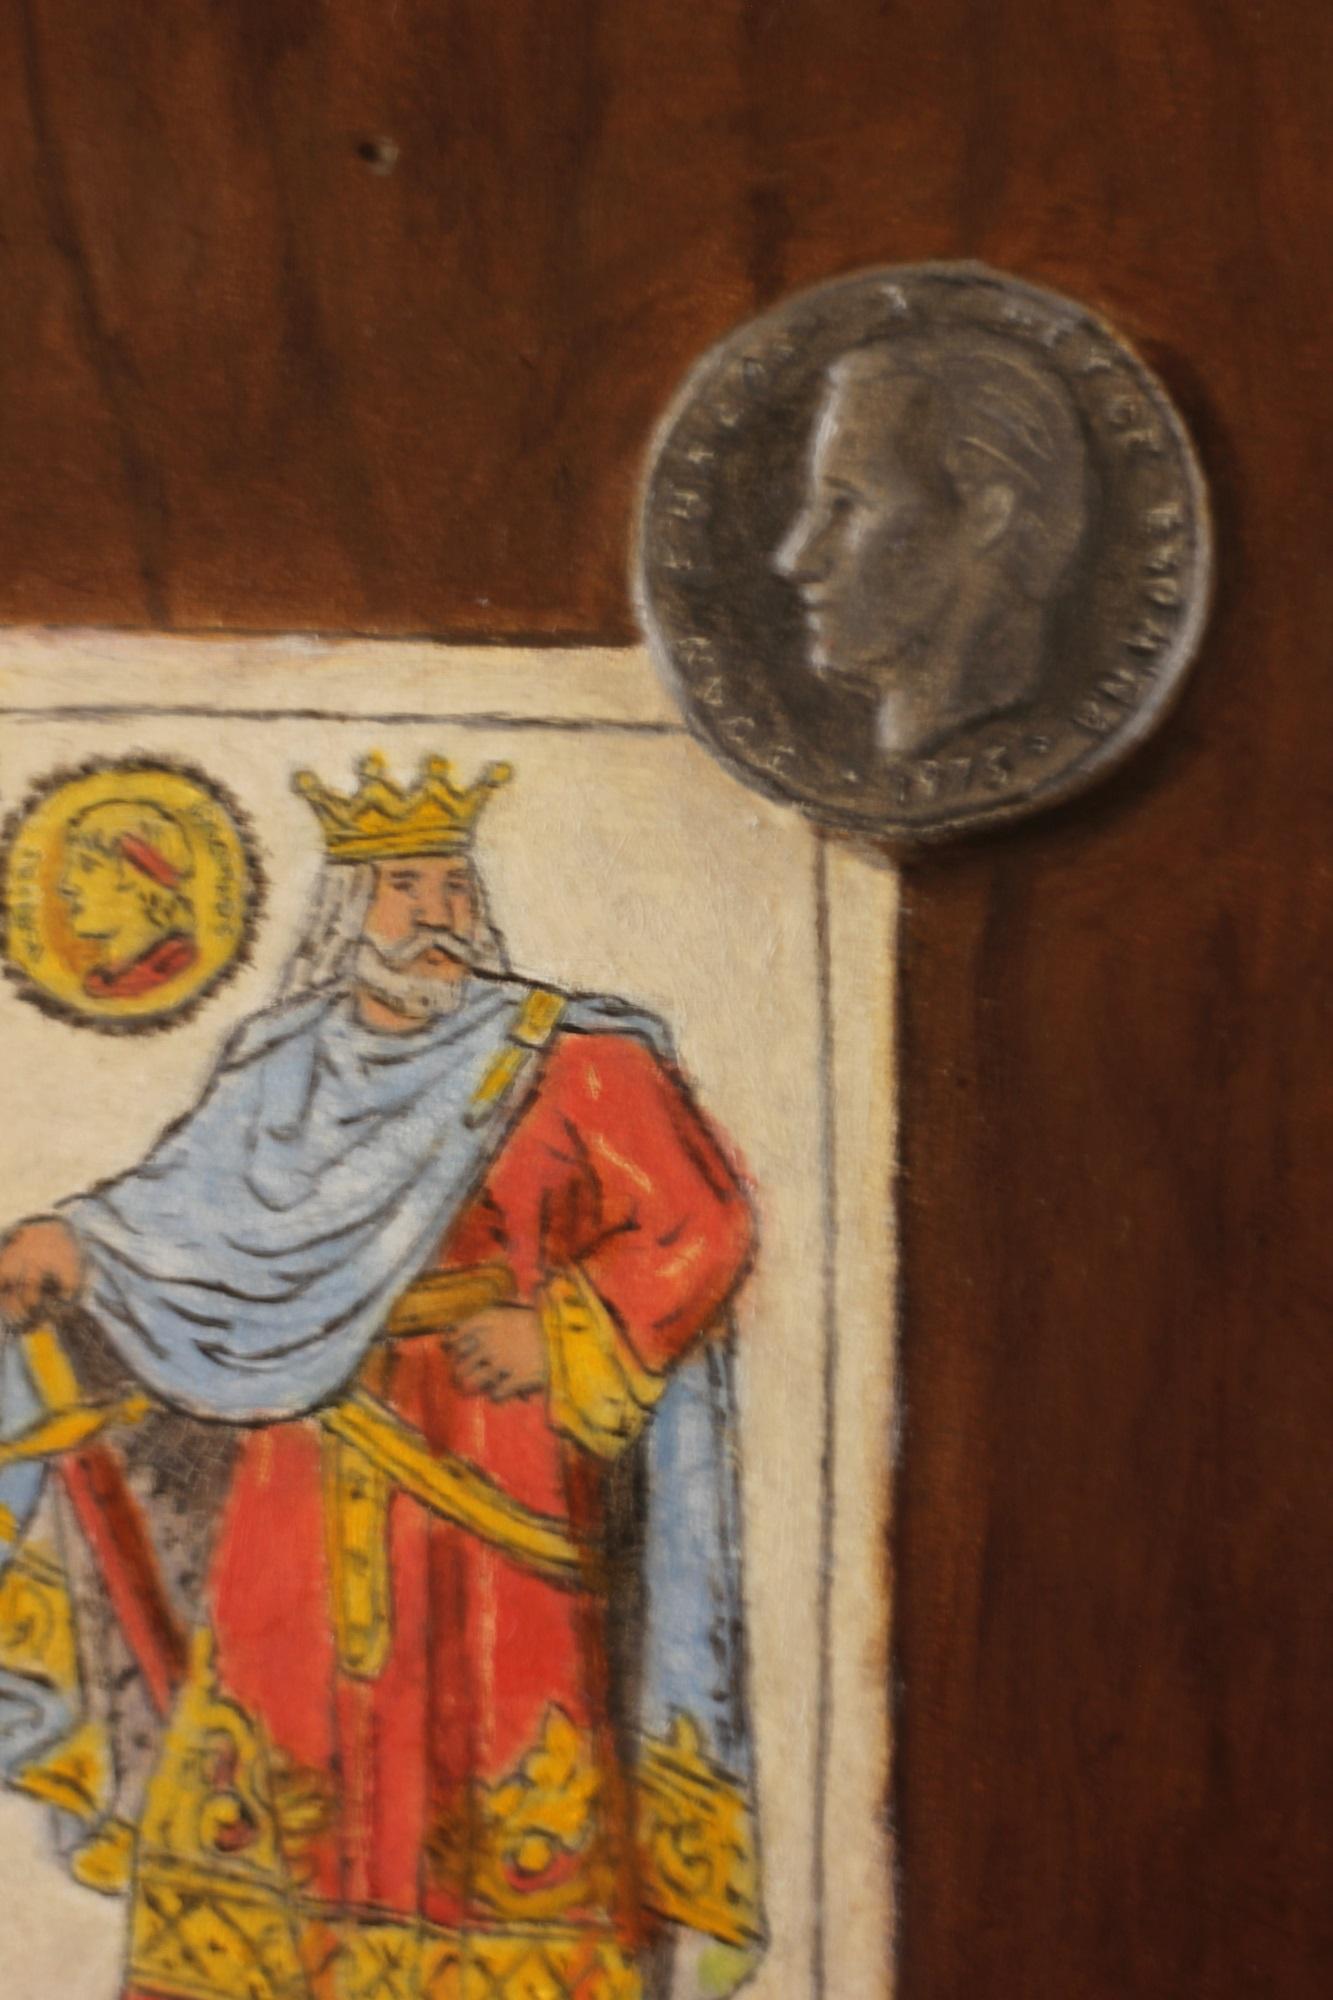 <p>Artist Comments<br /> In this piece I wanted to show money on both the king of gold (from the Spanish playing cards) and on the coin. The king is actually shown twice ; once on the king of gold card and once on the oversized coin of Juan Carlos